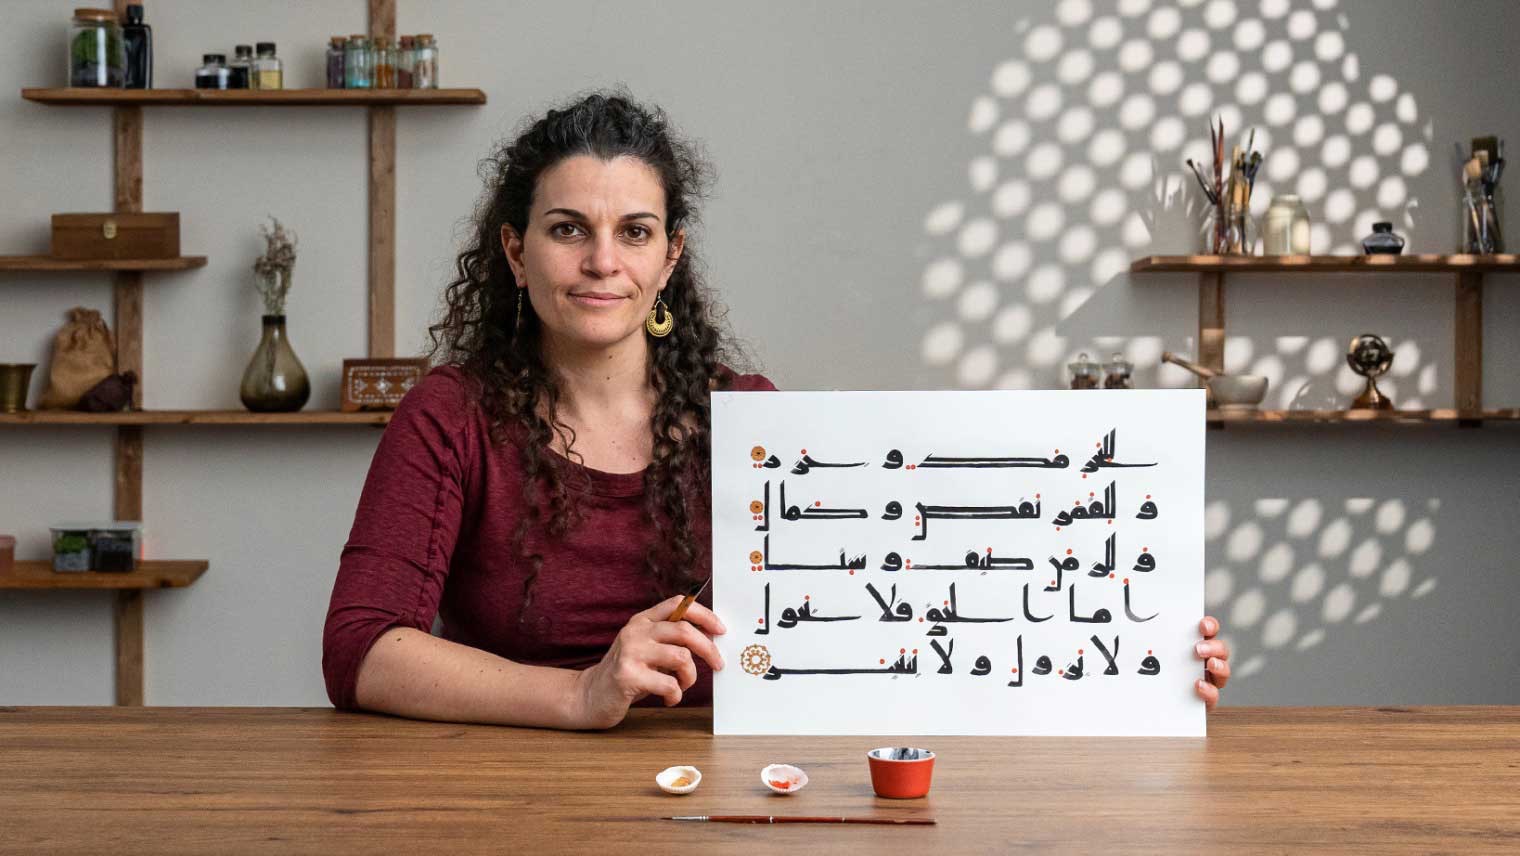 More information about "Arabic Calligraphy Online Course: Learn Kufic Script"